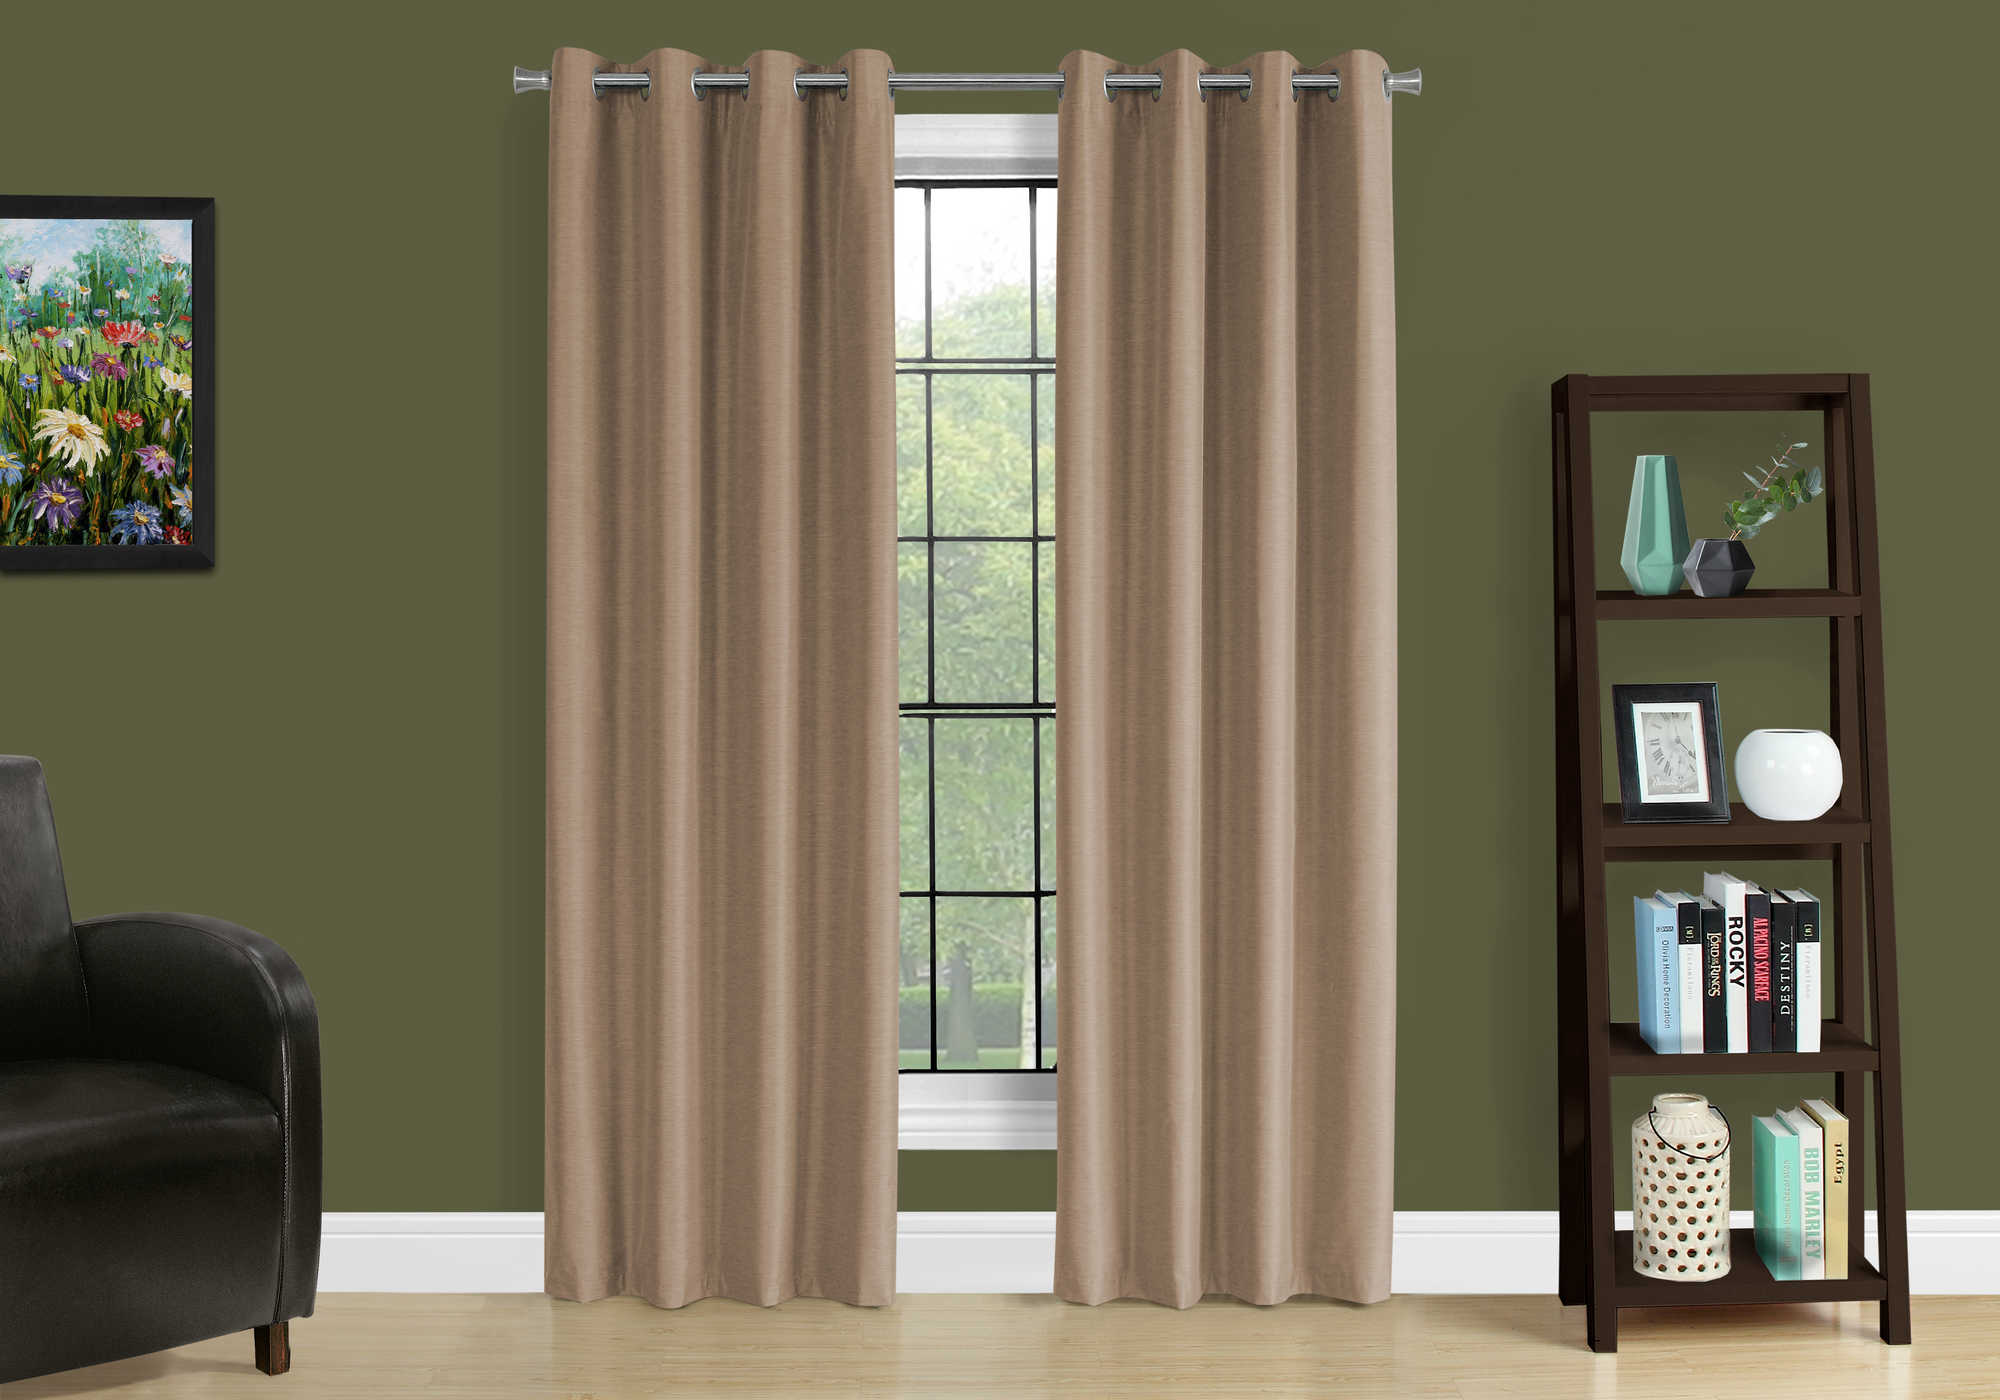 CURTAIN PANEL - 2PCS / 52"W X 84"H BROWN SOLID BLACKOUT